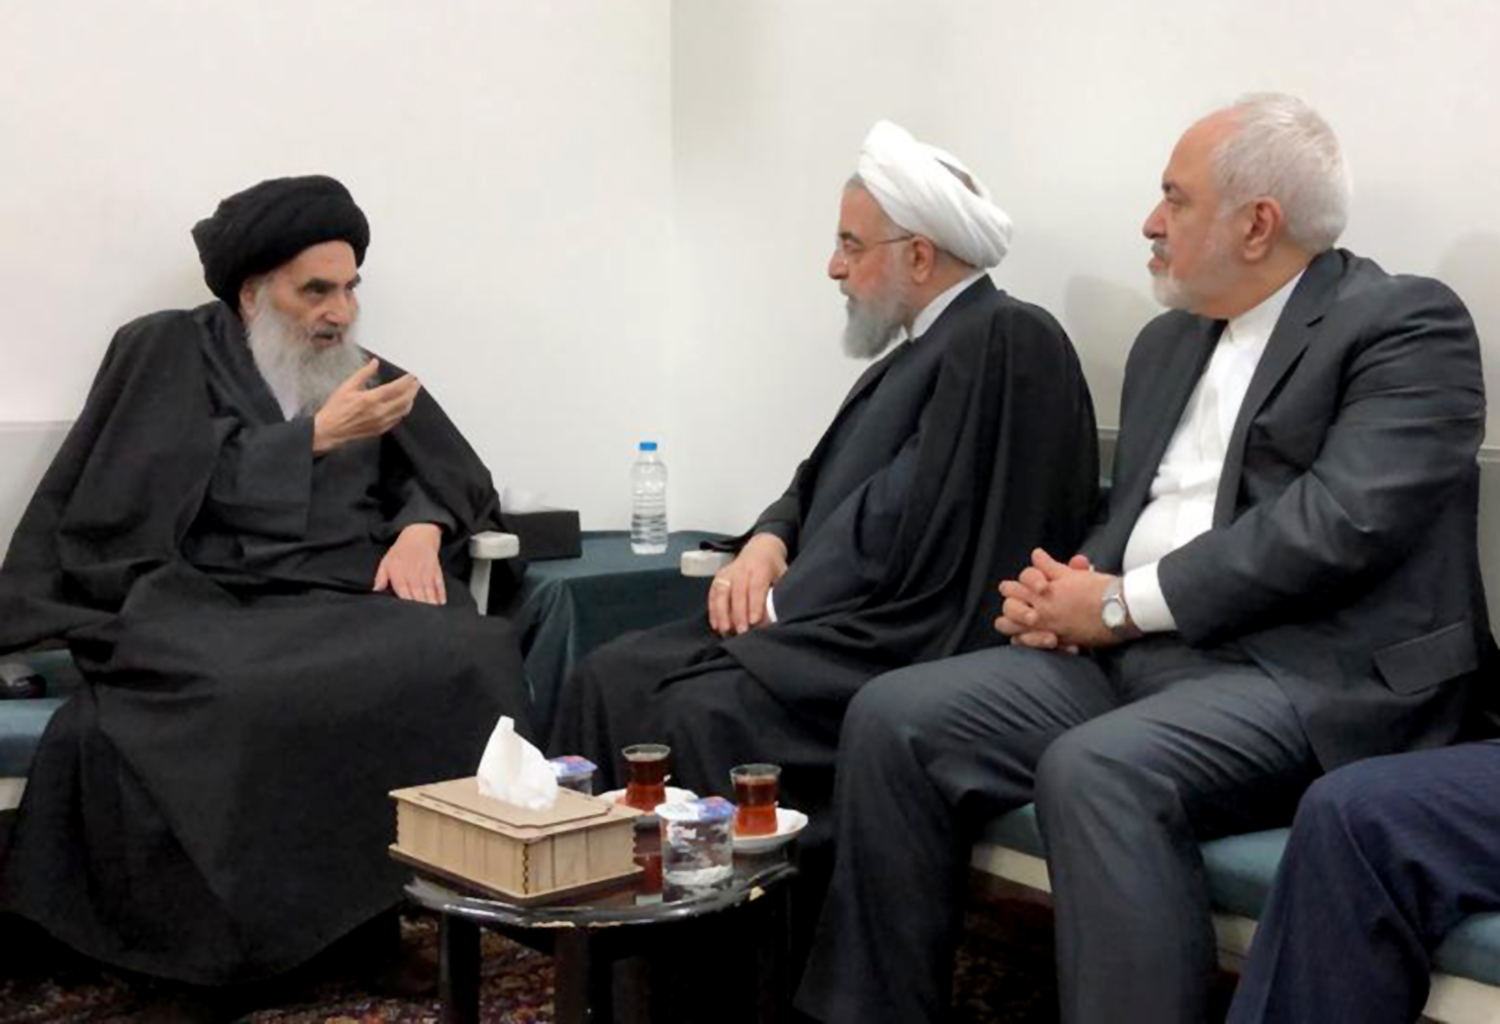 A handout picture provided by the media office of Grand Ayatollah Ali Sistani shows the chief Shiite cleric (L) meeting with Iranian President Hassan Rouhani (C) and Foreign Minister Mohammad Javad Zarif (R) in the Iraqi central city of Najaf on March 13, 2019.